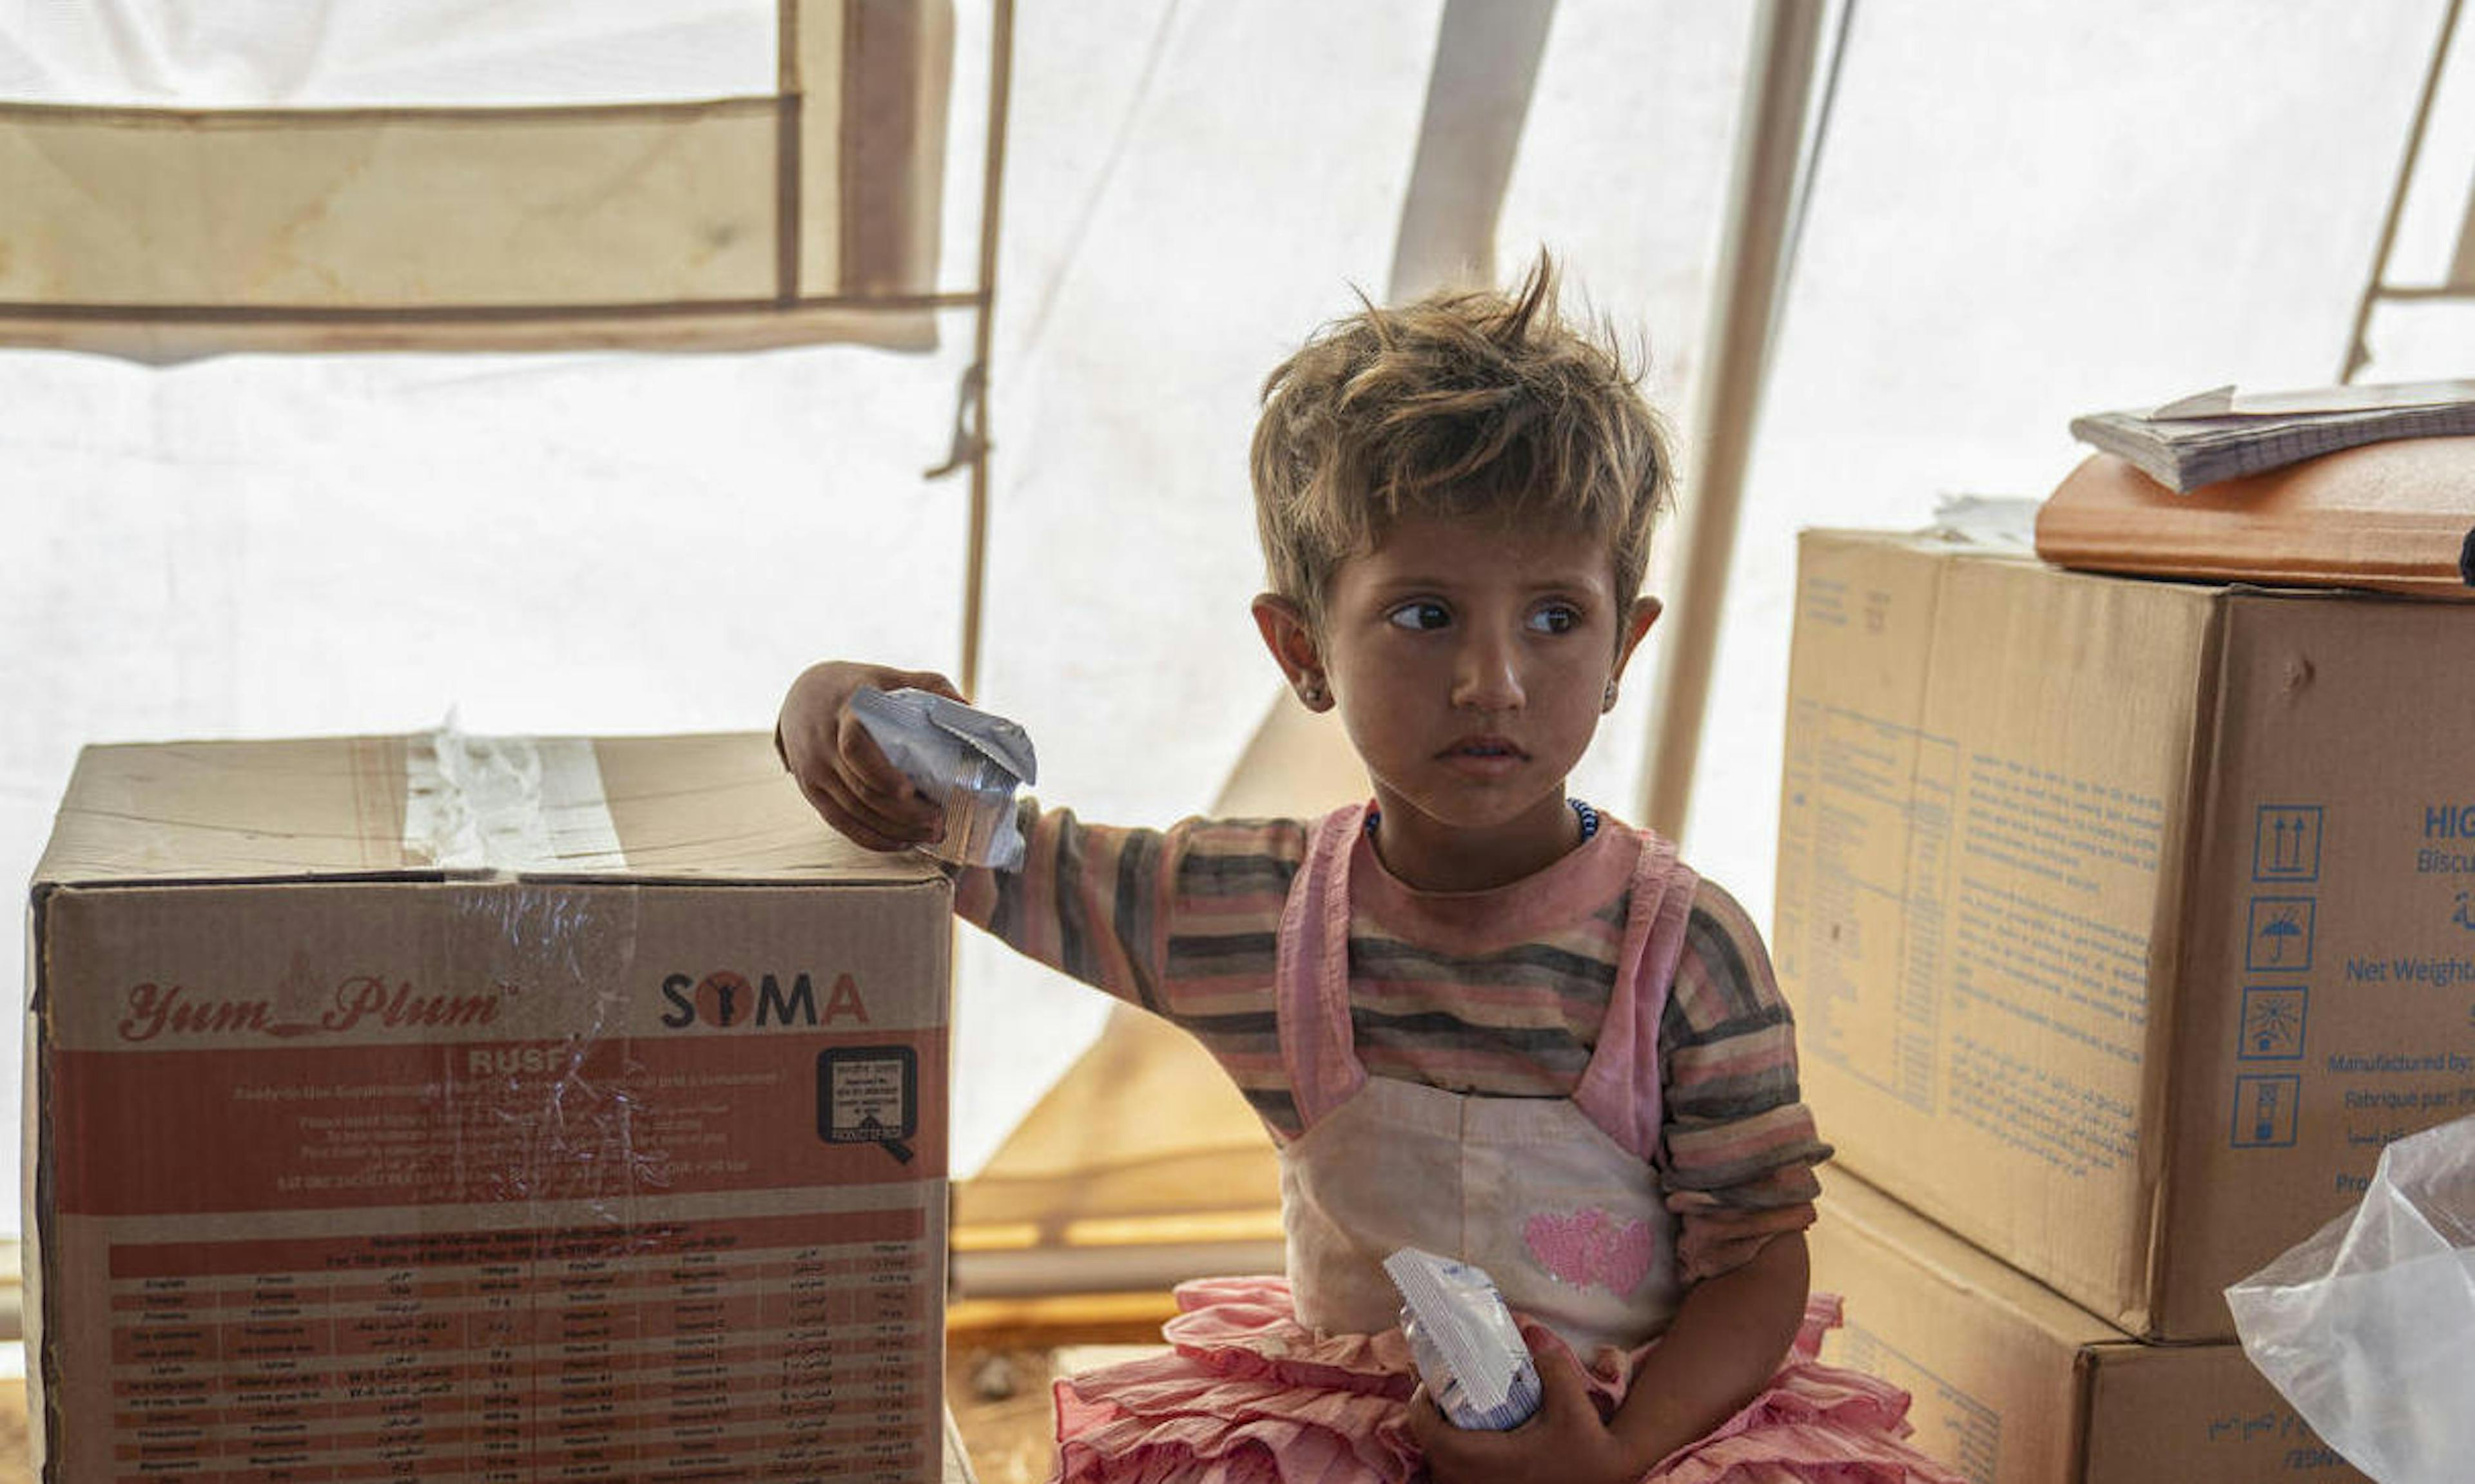 Nour, 2, holds high energy biscuits, during checkup at the UNICEF mobile health clinic, in Al-Zhuriah makeshift camp, Rural Homs, Syria.